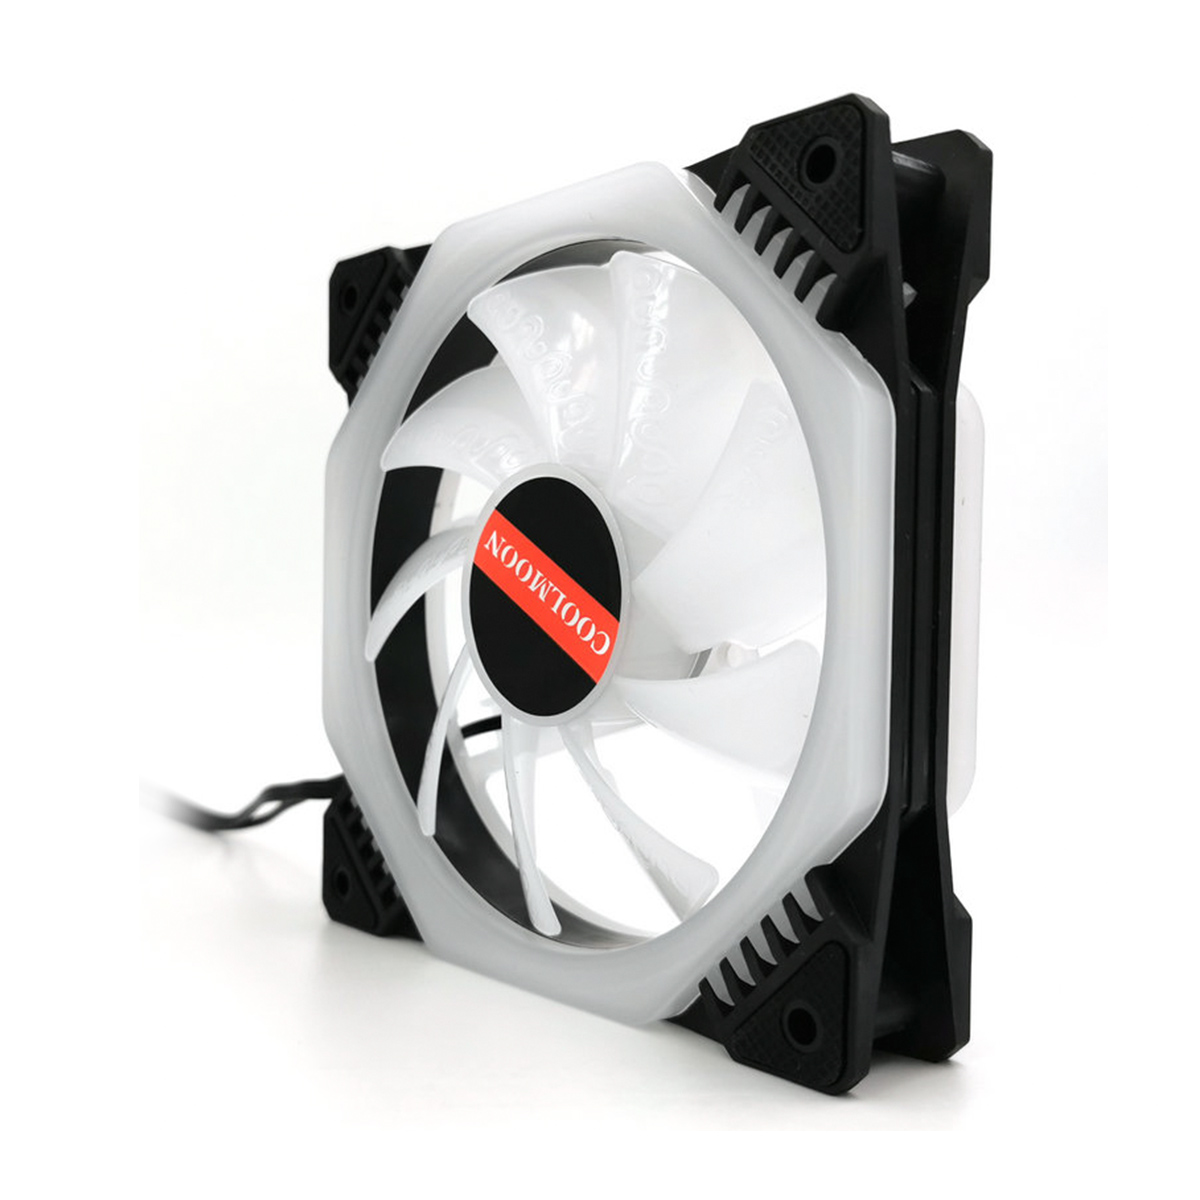 Find Computer PC Cooler Cooling Fan RGB LED Multicolor mode 12cm Quiet Chassis Fan for Sale on Gipsybee.com with cryptocurrencies